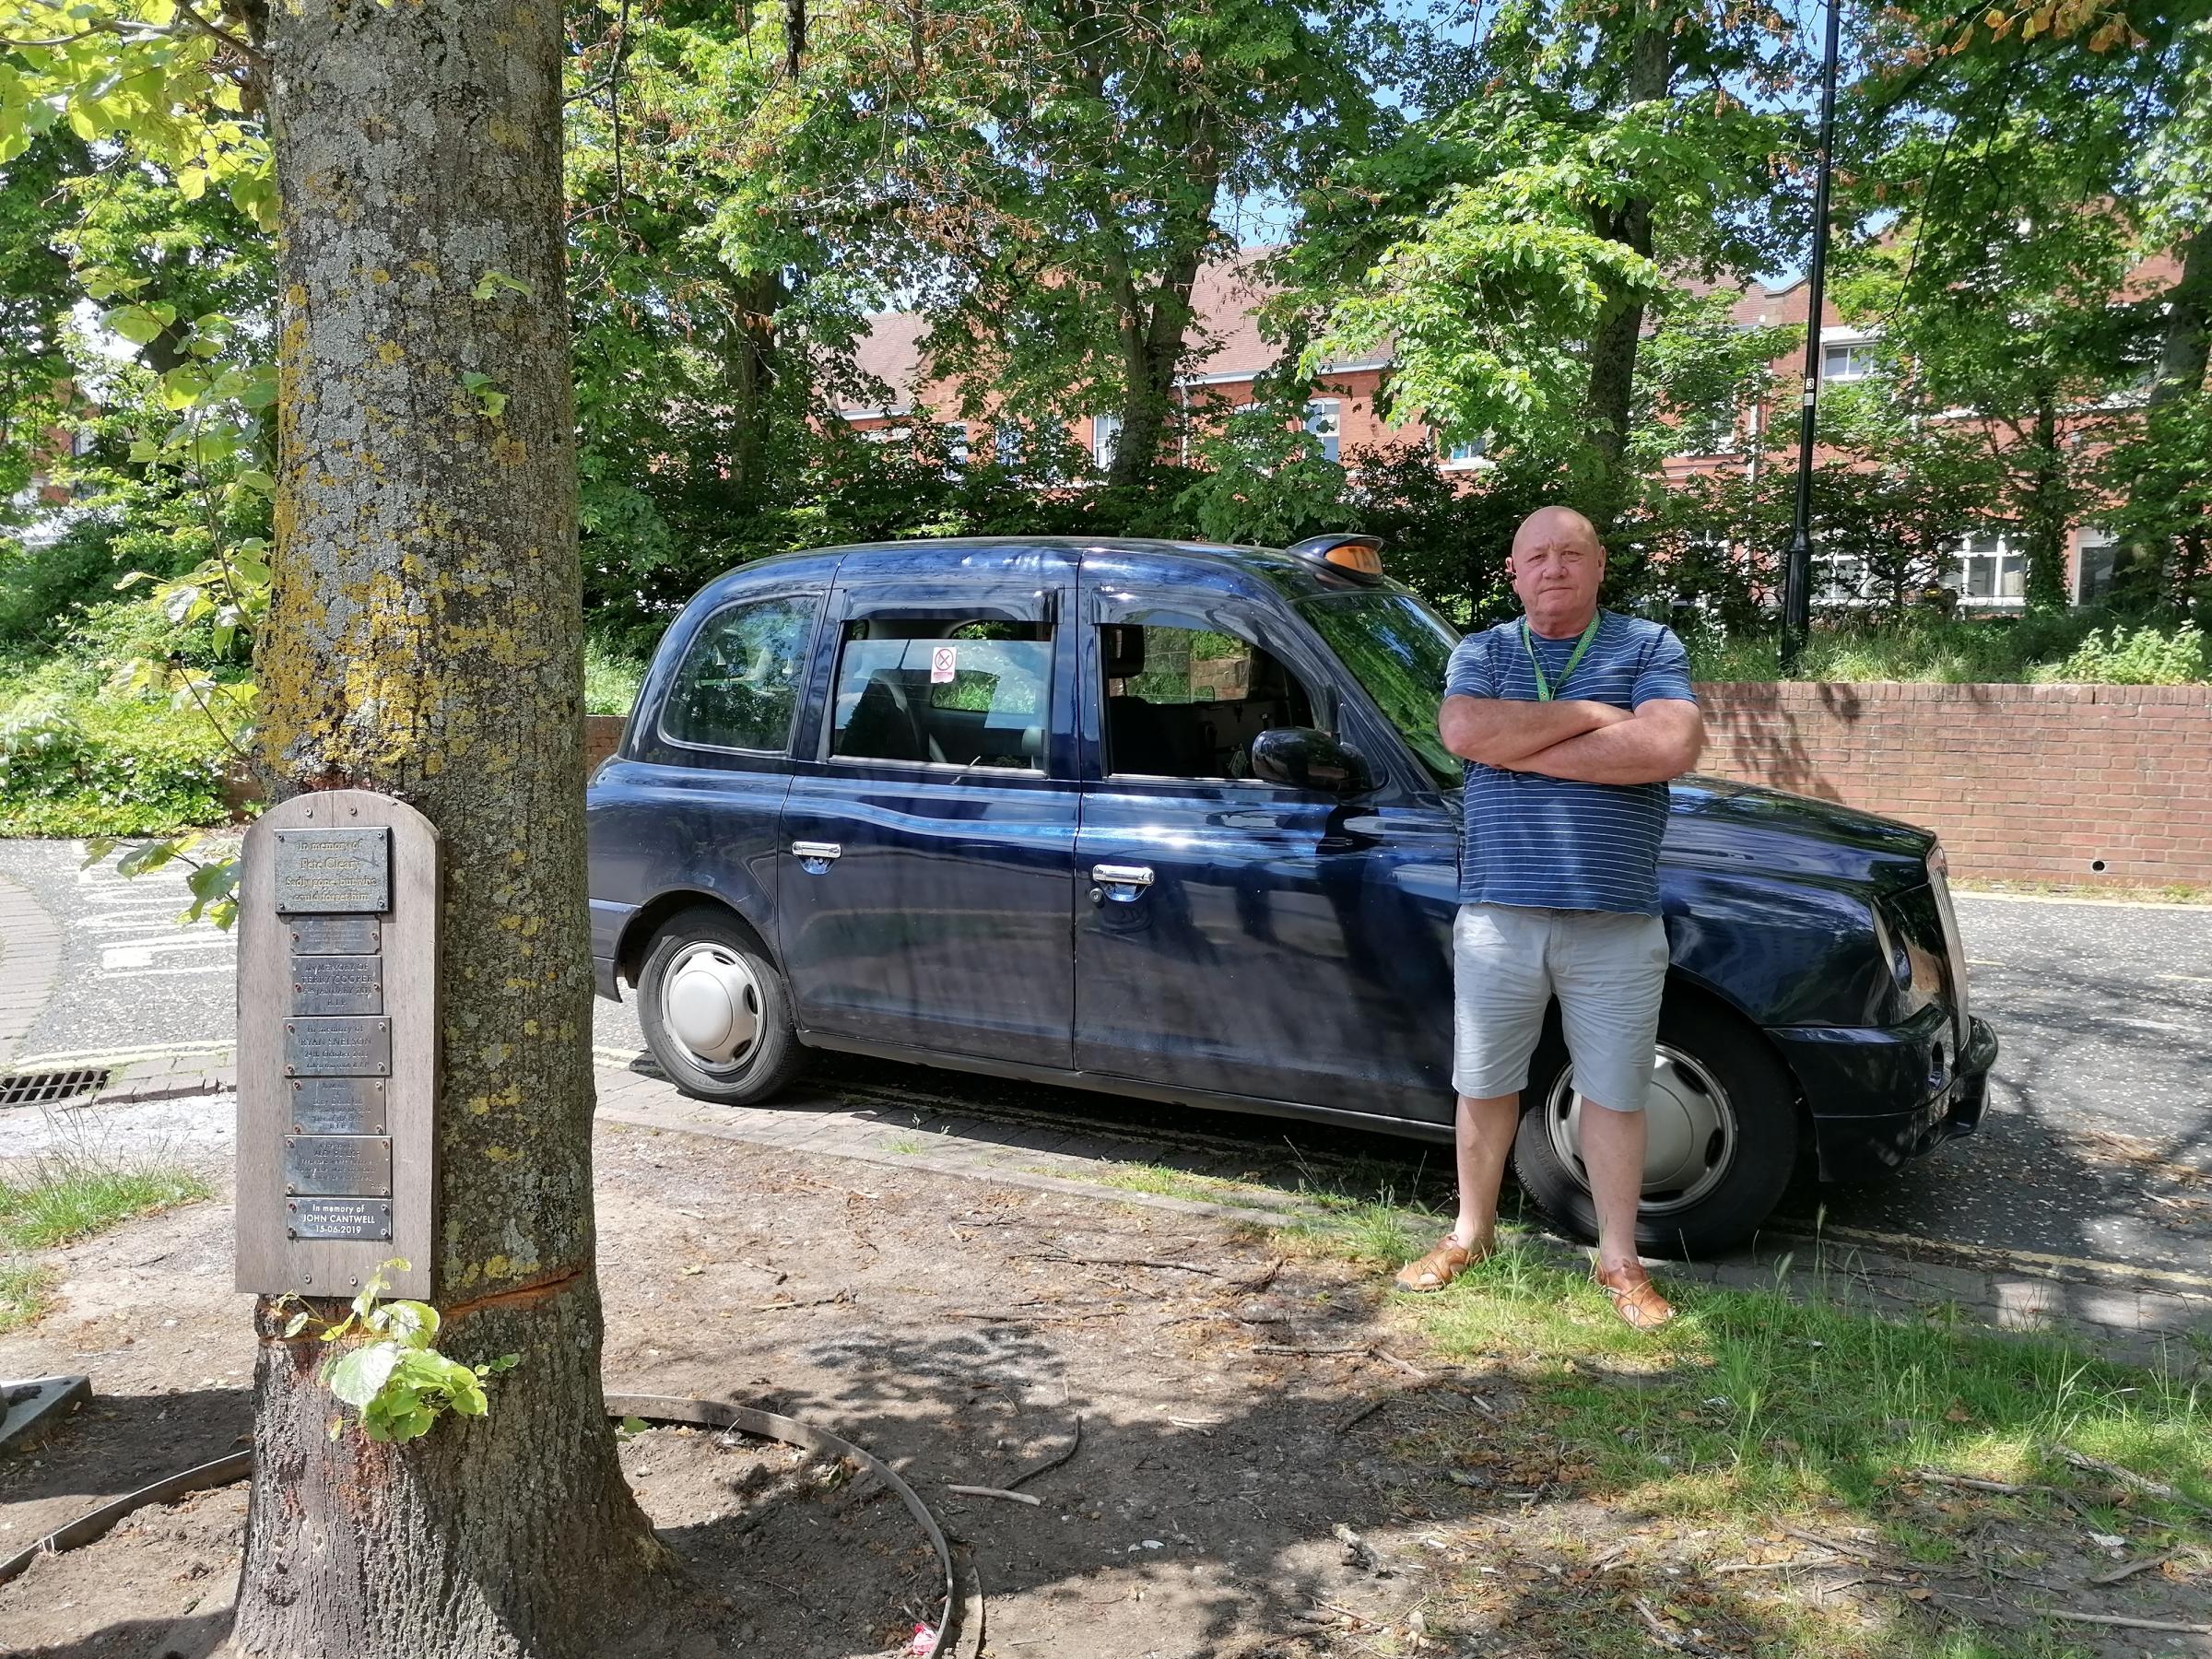 Hackney carriage driver Norman Smith has been left upset by the vandalism